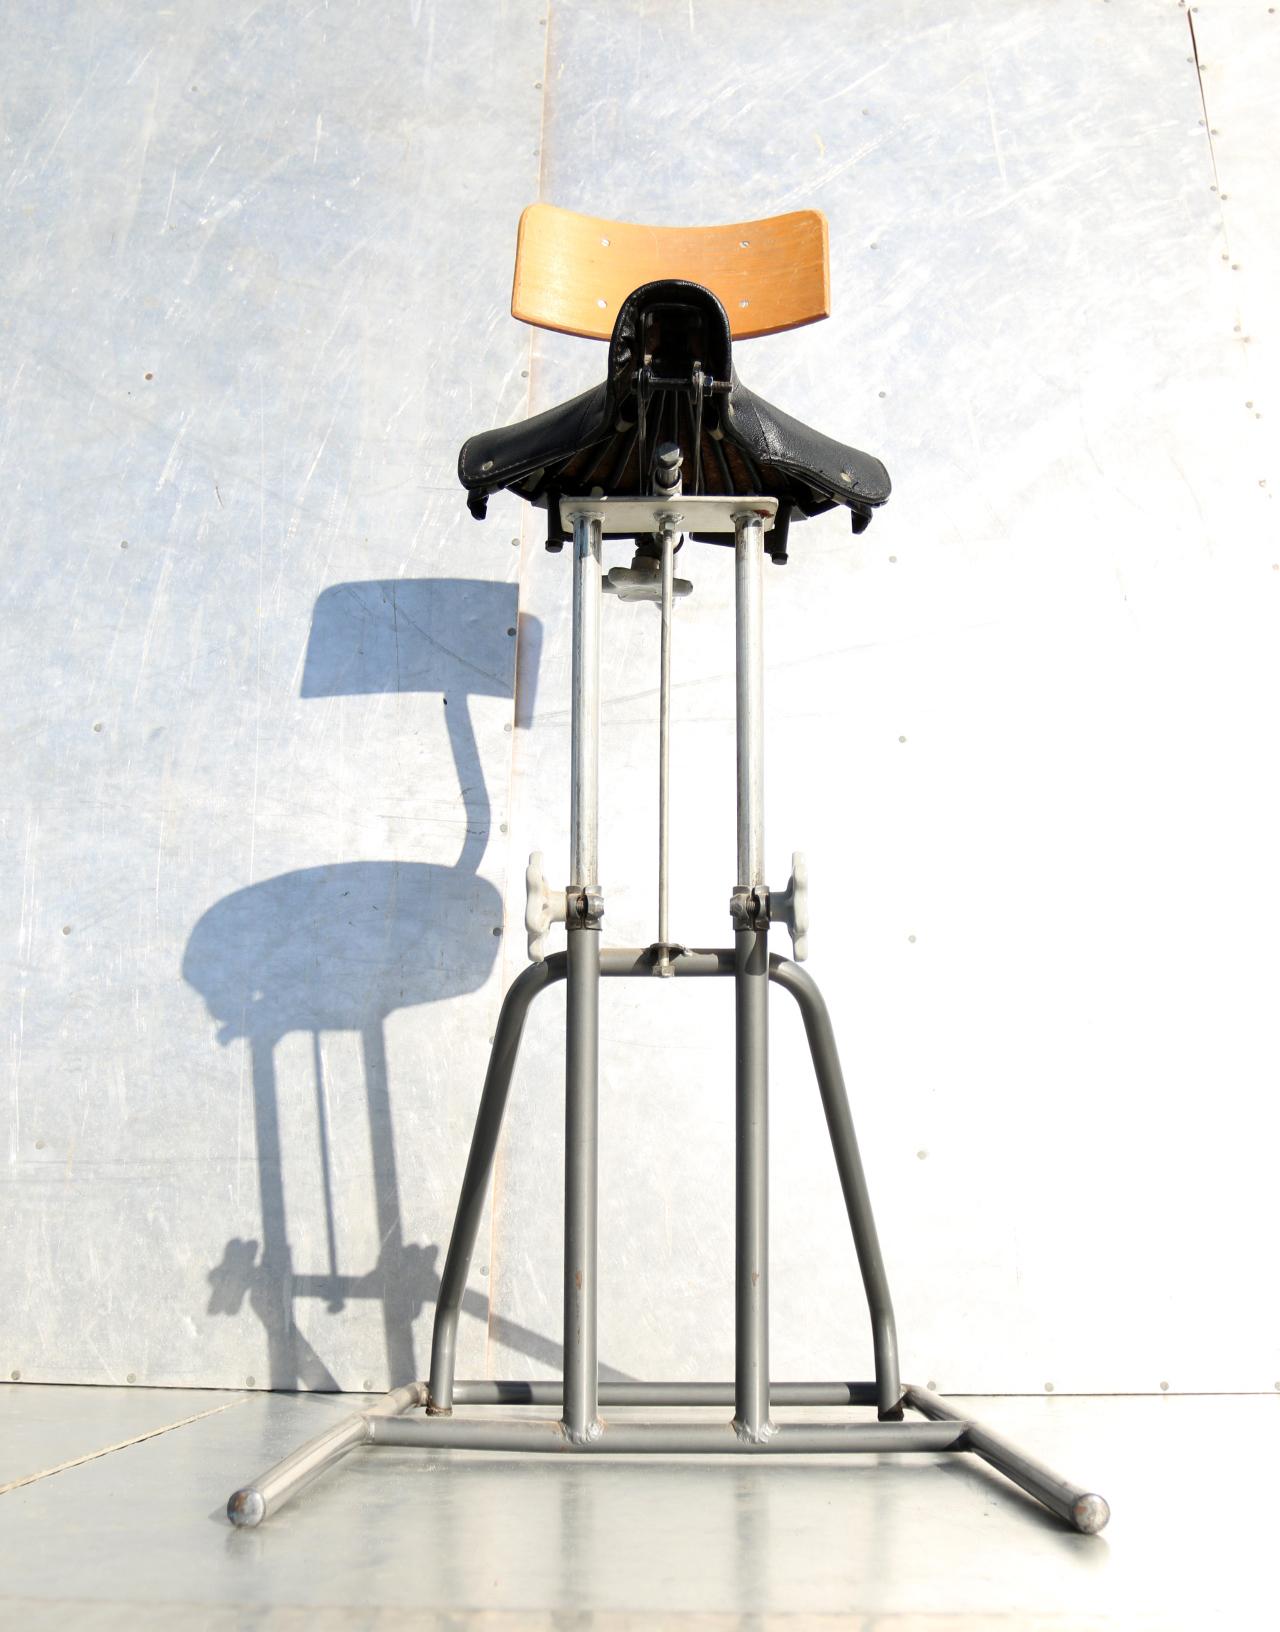 Super cool Industrial Design. Bicycle Saddle chair or Atelier chair.
You can adjust the height of the chair, the back is also adjustable from front to back.
Very good chair for a straight posture during work.
The brand of the saddle is